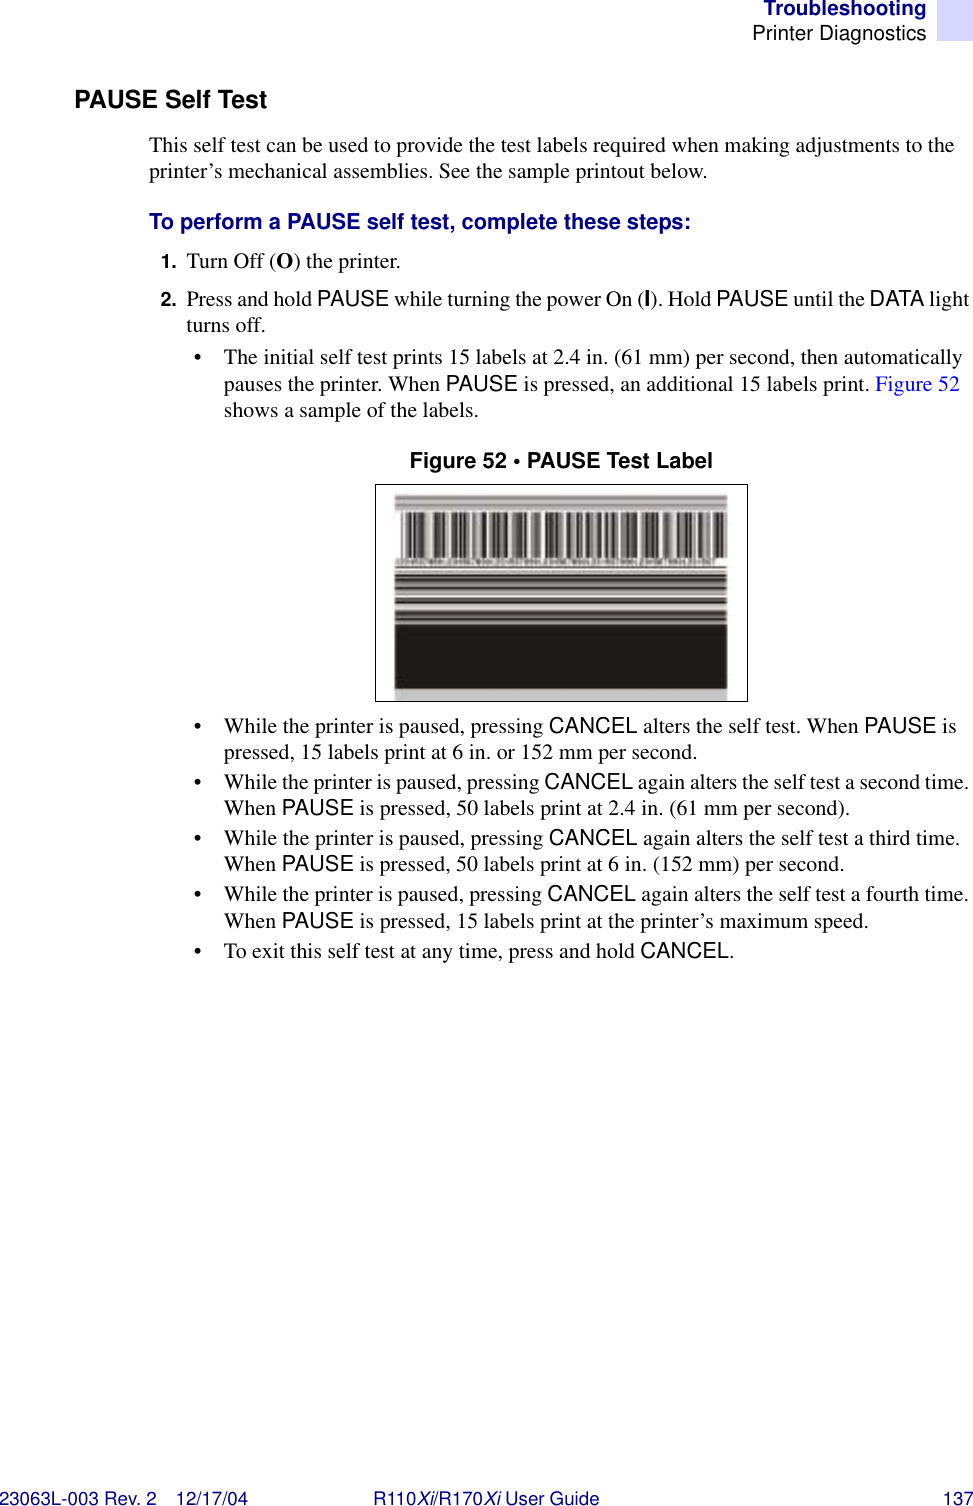 TroubleshootingPrinter Diagnostics23063L-003 Rev. 2 12/17/04 R110Xi/R170Xi User Guide 137PAUSE Self TestThis self test can be used to provide the test labels required when making adjustments to the printer’s mechanical assemblies. See the sample printout below.To perform a PAUSE self test, complete these steps:1. Turn Off (O) the printer.2. Press and hold PAUSE while turning the power On (I). Hold PAUSE until the DATA light turns off.• The initial self test prints 15 labels at 2.4 in. (61 mm) per second, then automatically pauses the printer. When PAUSE is pressed, an additional 15 labels print. Figure 52 shows a sample of the labels.Figure 52 • PAUSE Test Label• While the printer is paused, pressing CANCEL alters the self test. When PAUSE is pressed, 15 labels print at 6 in. or 152 mm per second.• While the printer is paused, pressing CANCEL again alters the self test a second time. When PAUSE is pressed, 50 labels print at 2.4 in. (61 mm per second).• While the printer is paused, pressing CANCEL again alters the self test a third time. When PAUSE is pressed, 50 labels print at 6 in. (152 mm) per second.• While the printer is paused, pressing CANCEL again alters the self test a fourth time. When PAUSE is pressed, 15 labels print at the printer’s maximum speed.• To exit this self test at any time, press and hold CANCEL.